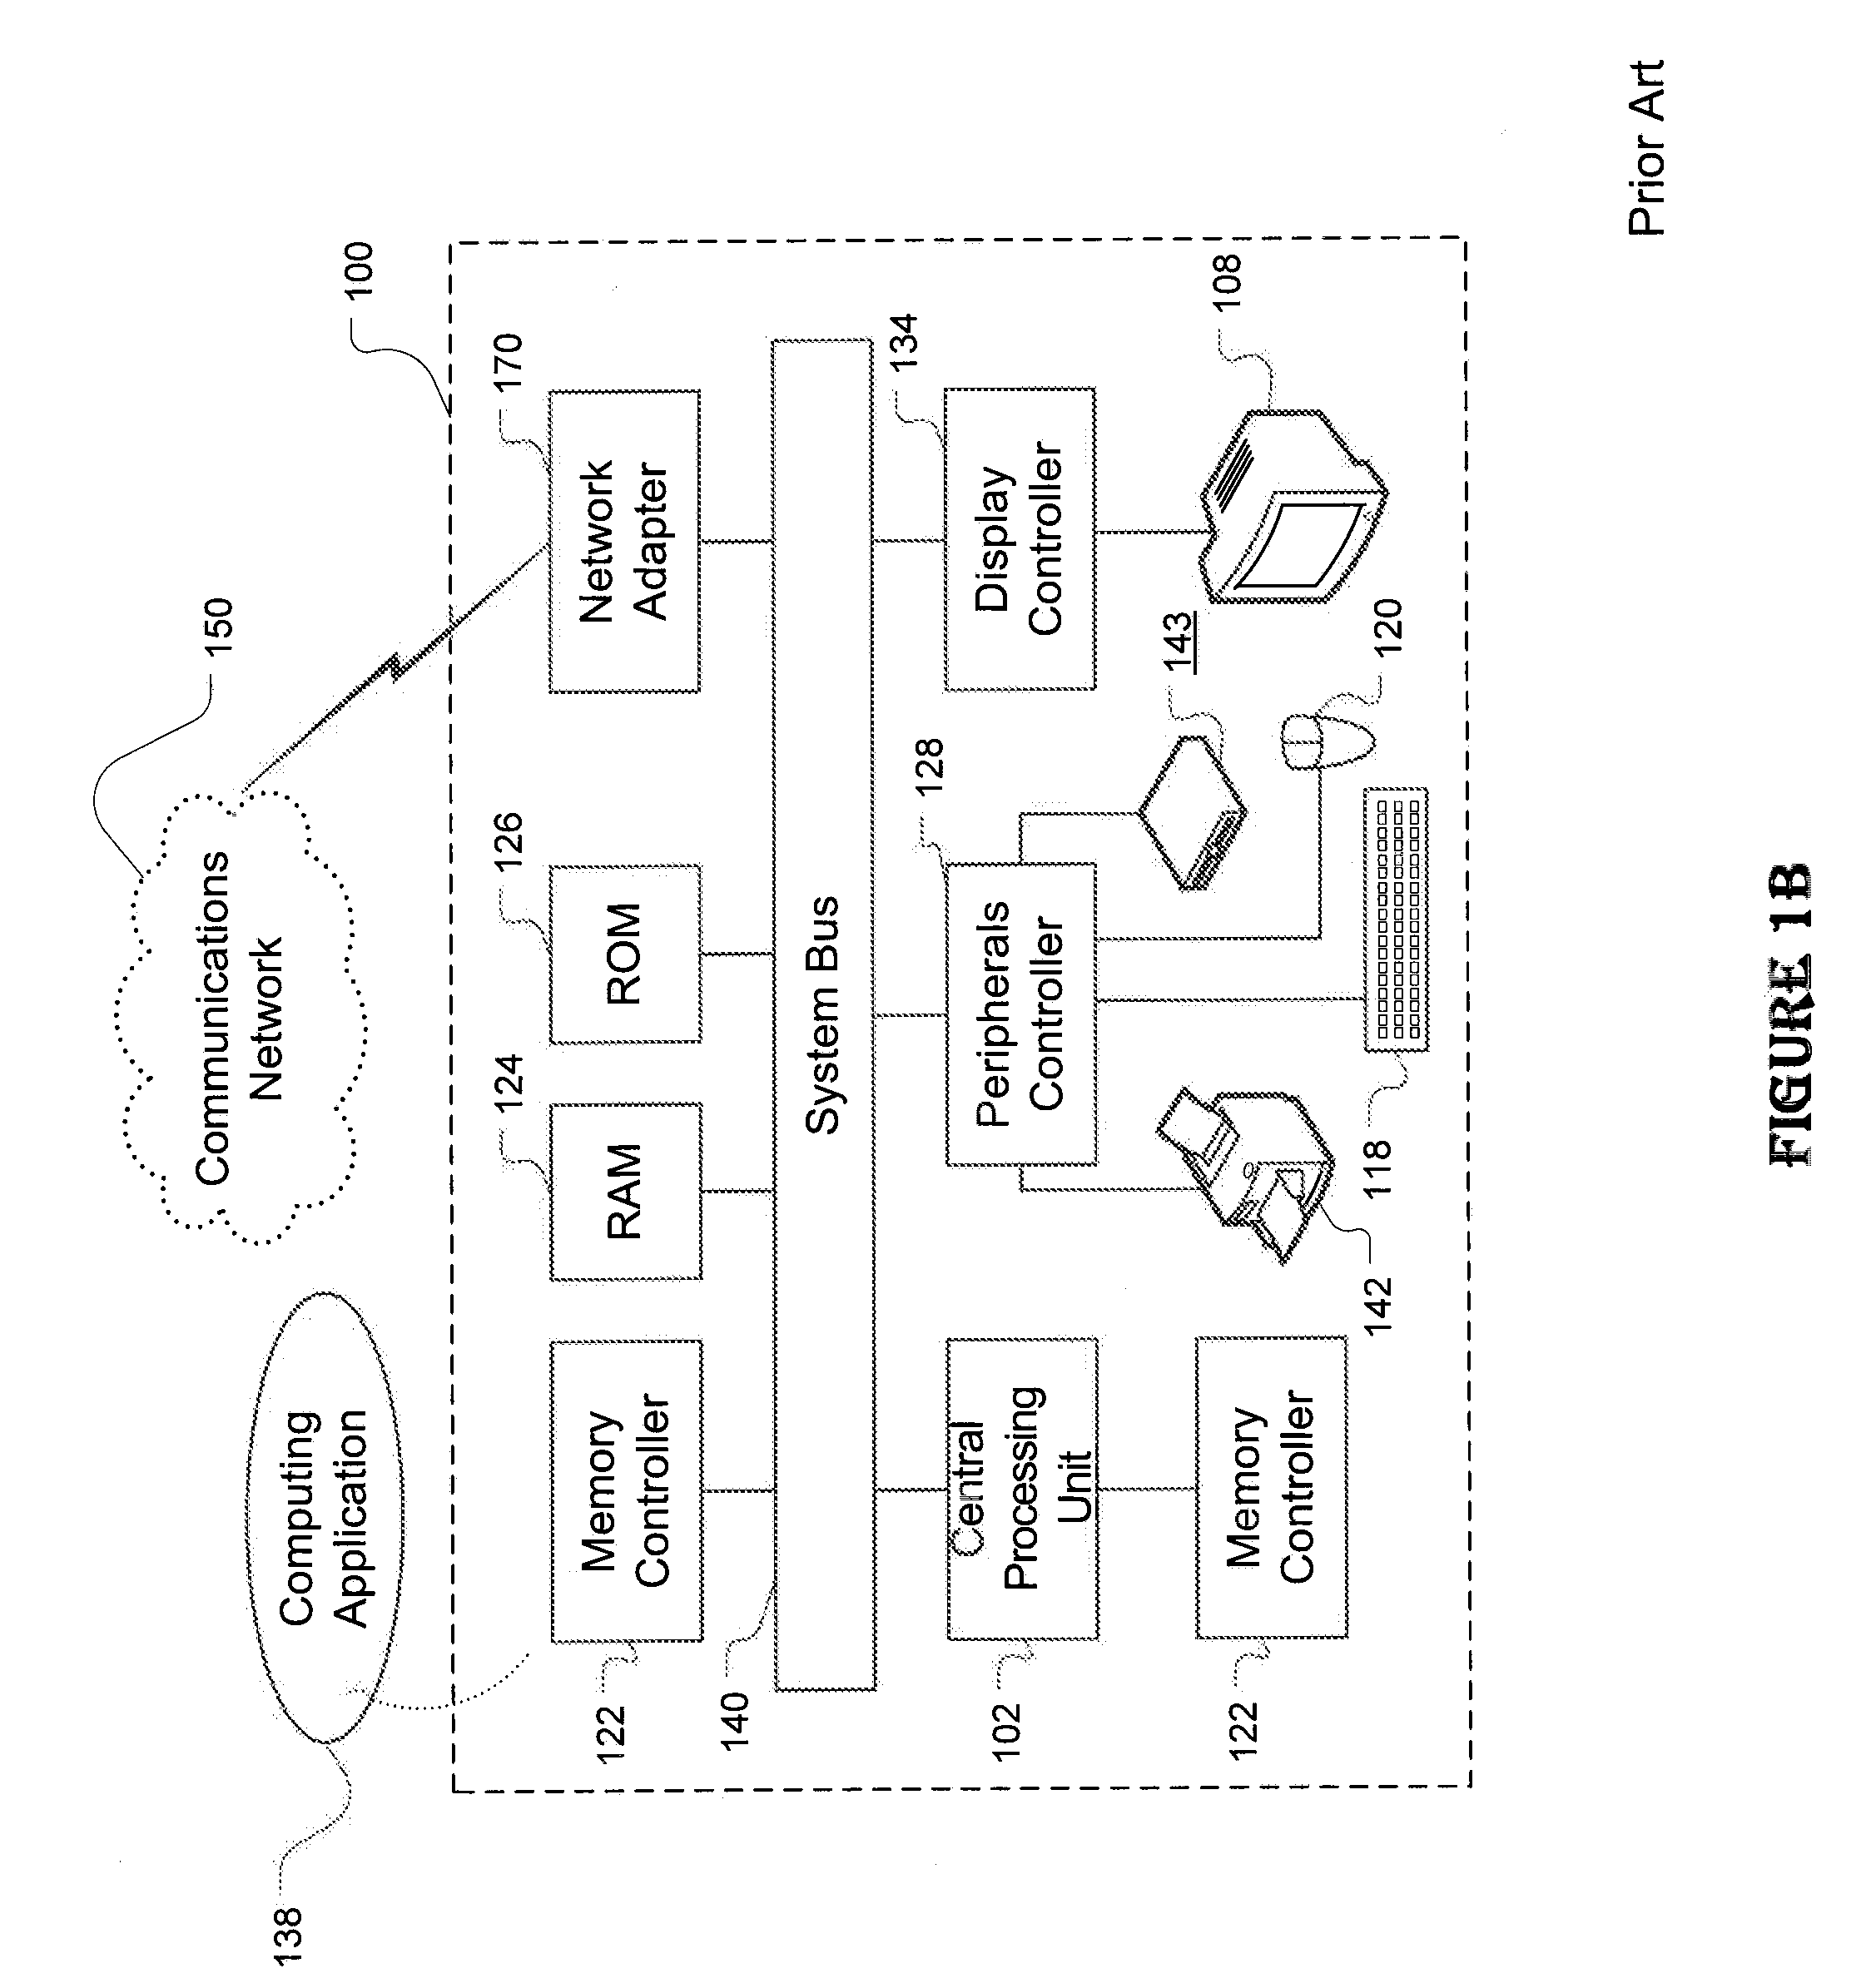 Web-based cross-platform wireless device application creation and management systems, and methods therefor